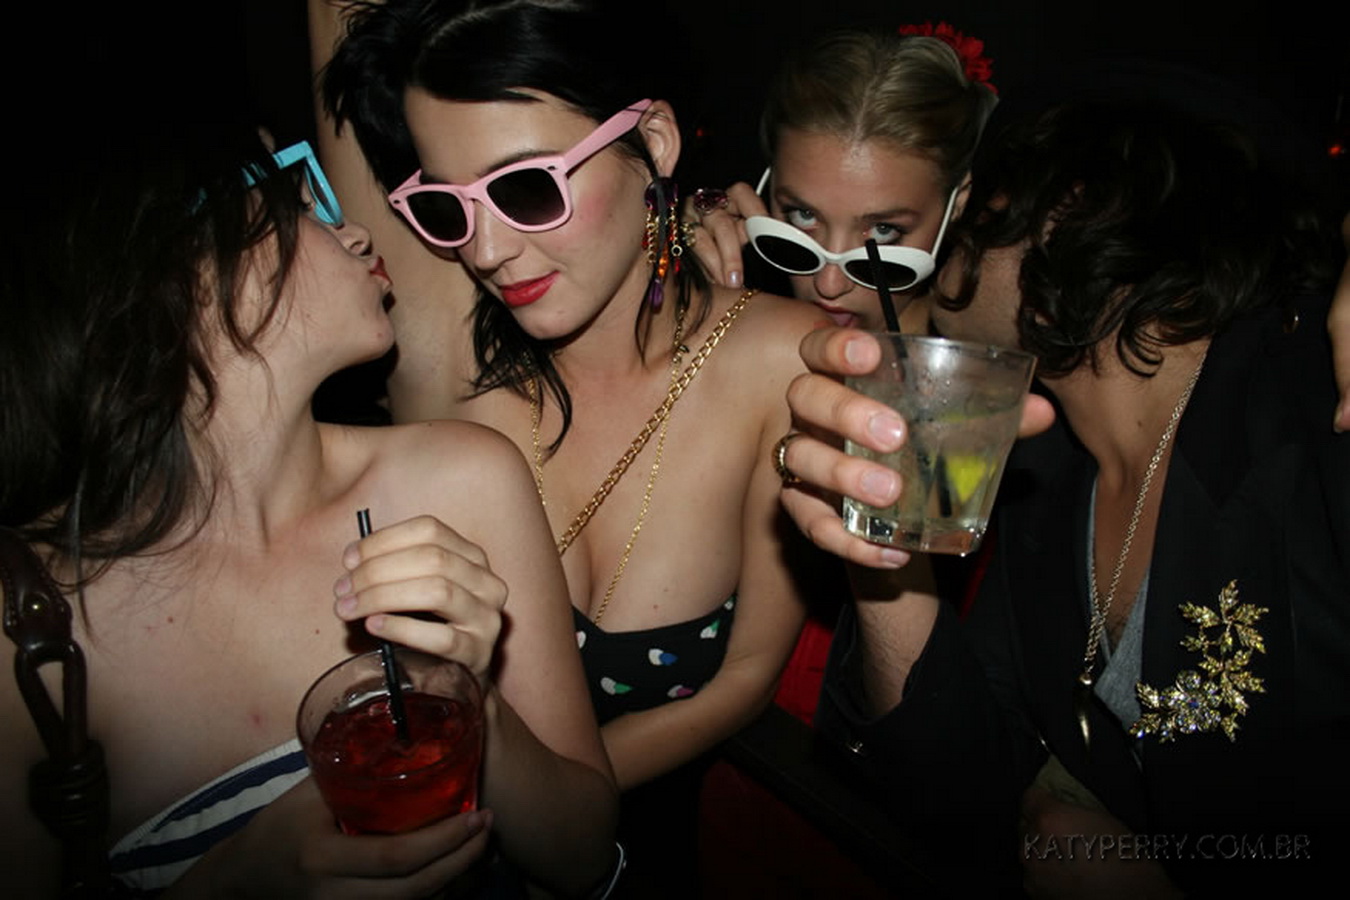 Katy_Perry_bobsslip_drunk_cleavage_downblouse_upskirt_nipslip_at_her_birthday_2007_party_99x_HQ_44.jpg